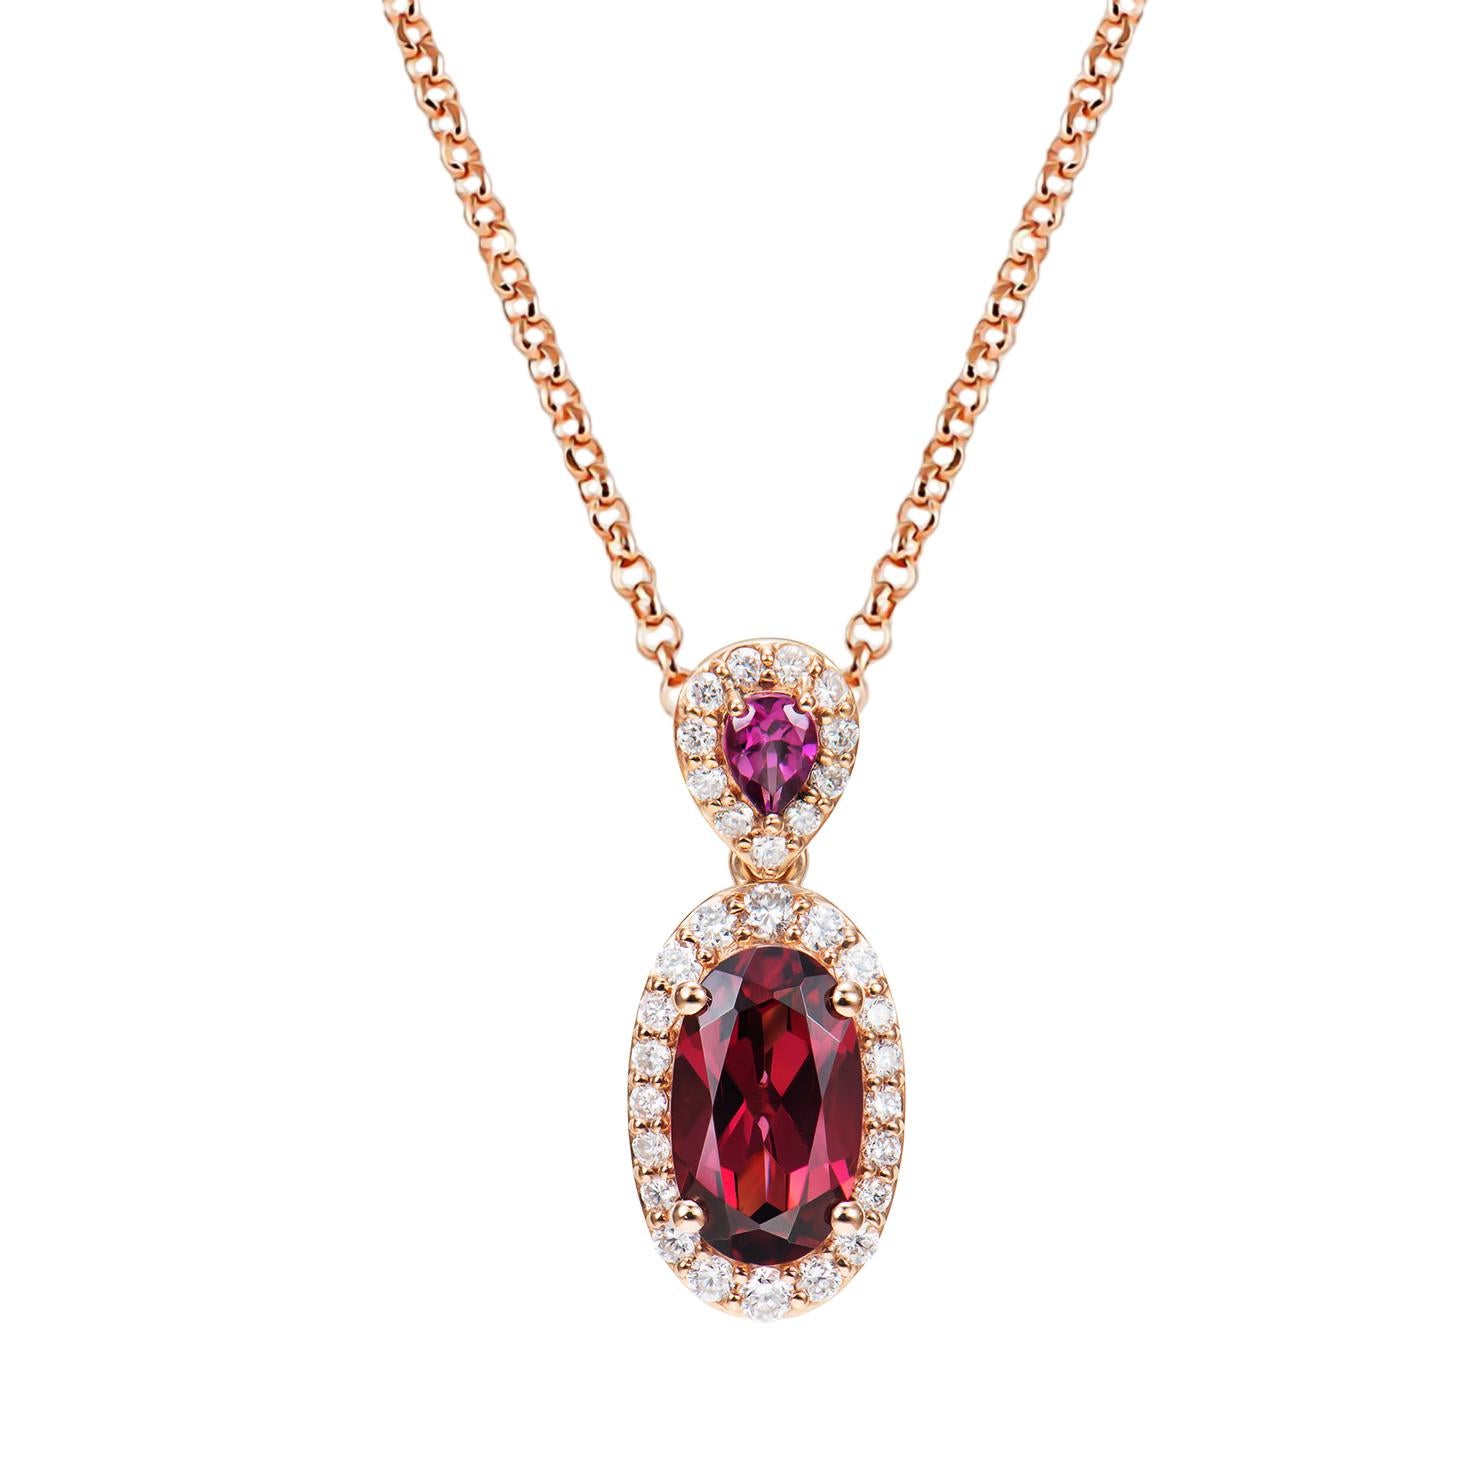 Celebrating Magenta as the color of the year for 2023, we present our exclusive Radiating Rhodolite collection. The magnificent magenta hues in these gems are brought to life in a classic rose gold setting with white diamonds.

Rhodolite Pendant in